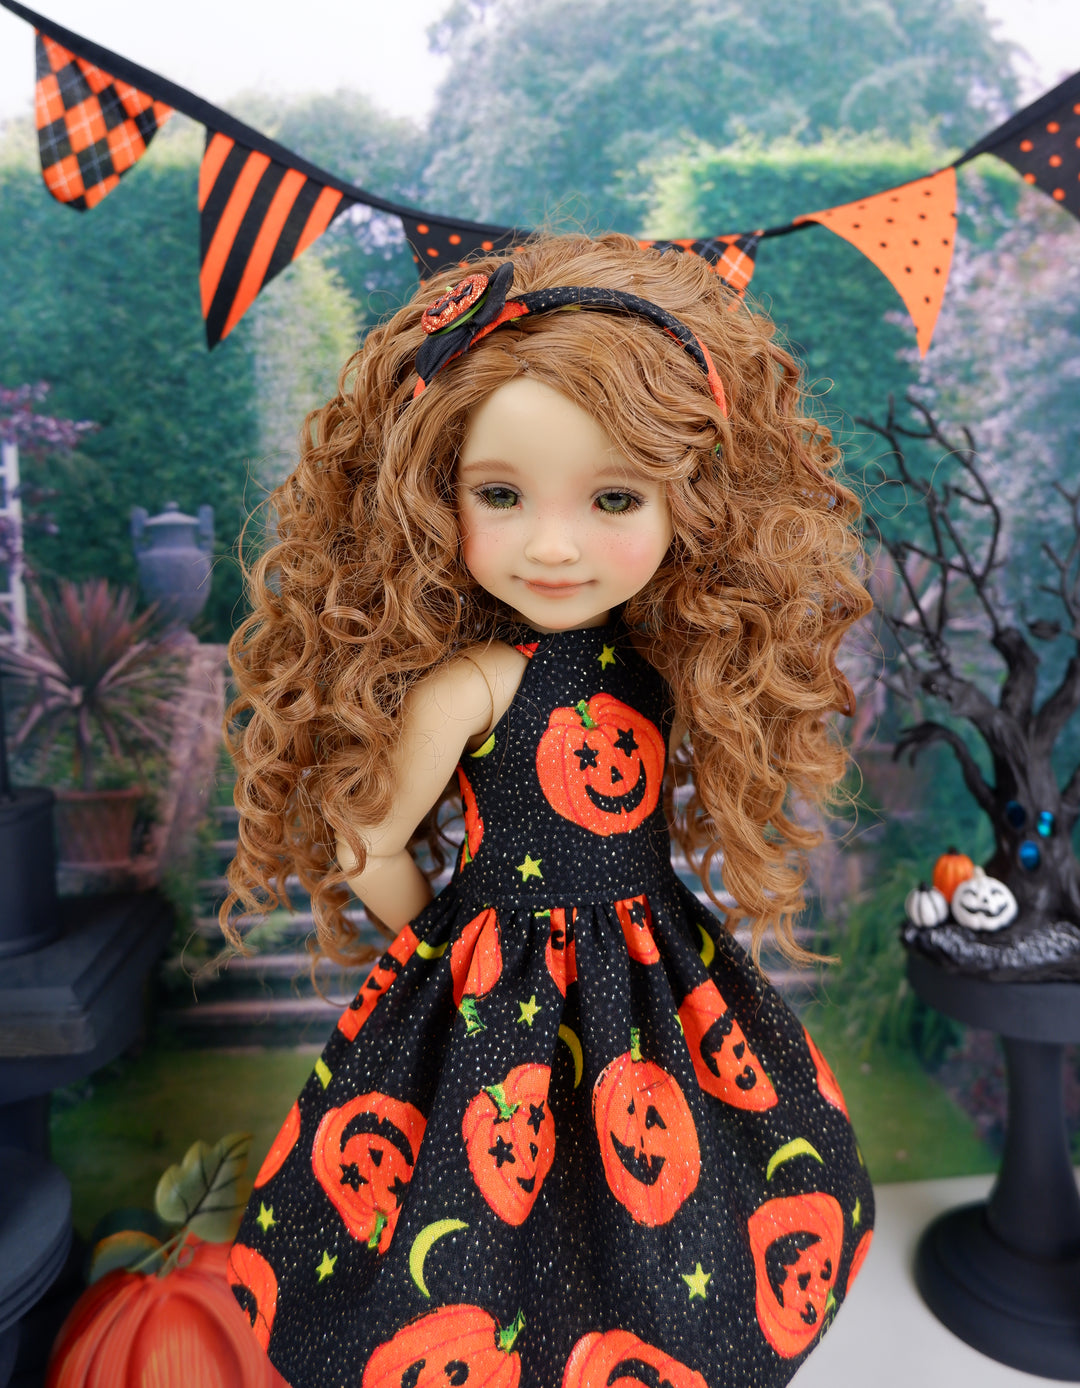 Smiling Pumpkins - dress with shoes for Ruby Red Fashion Friends doll